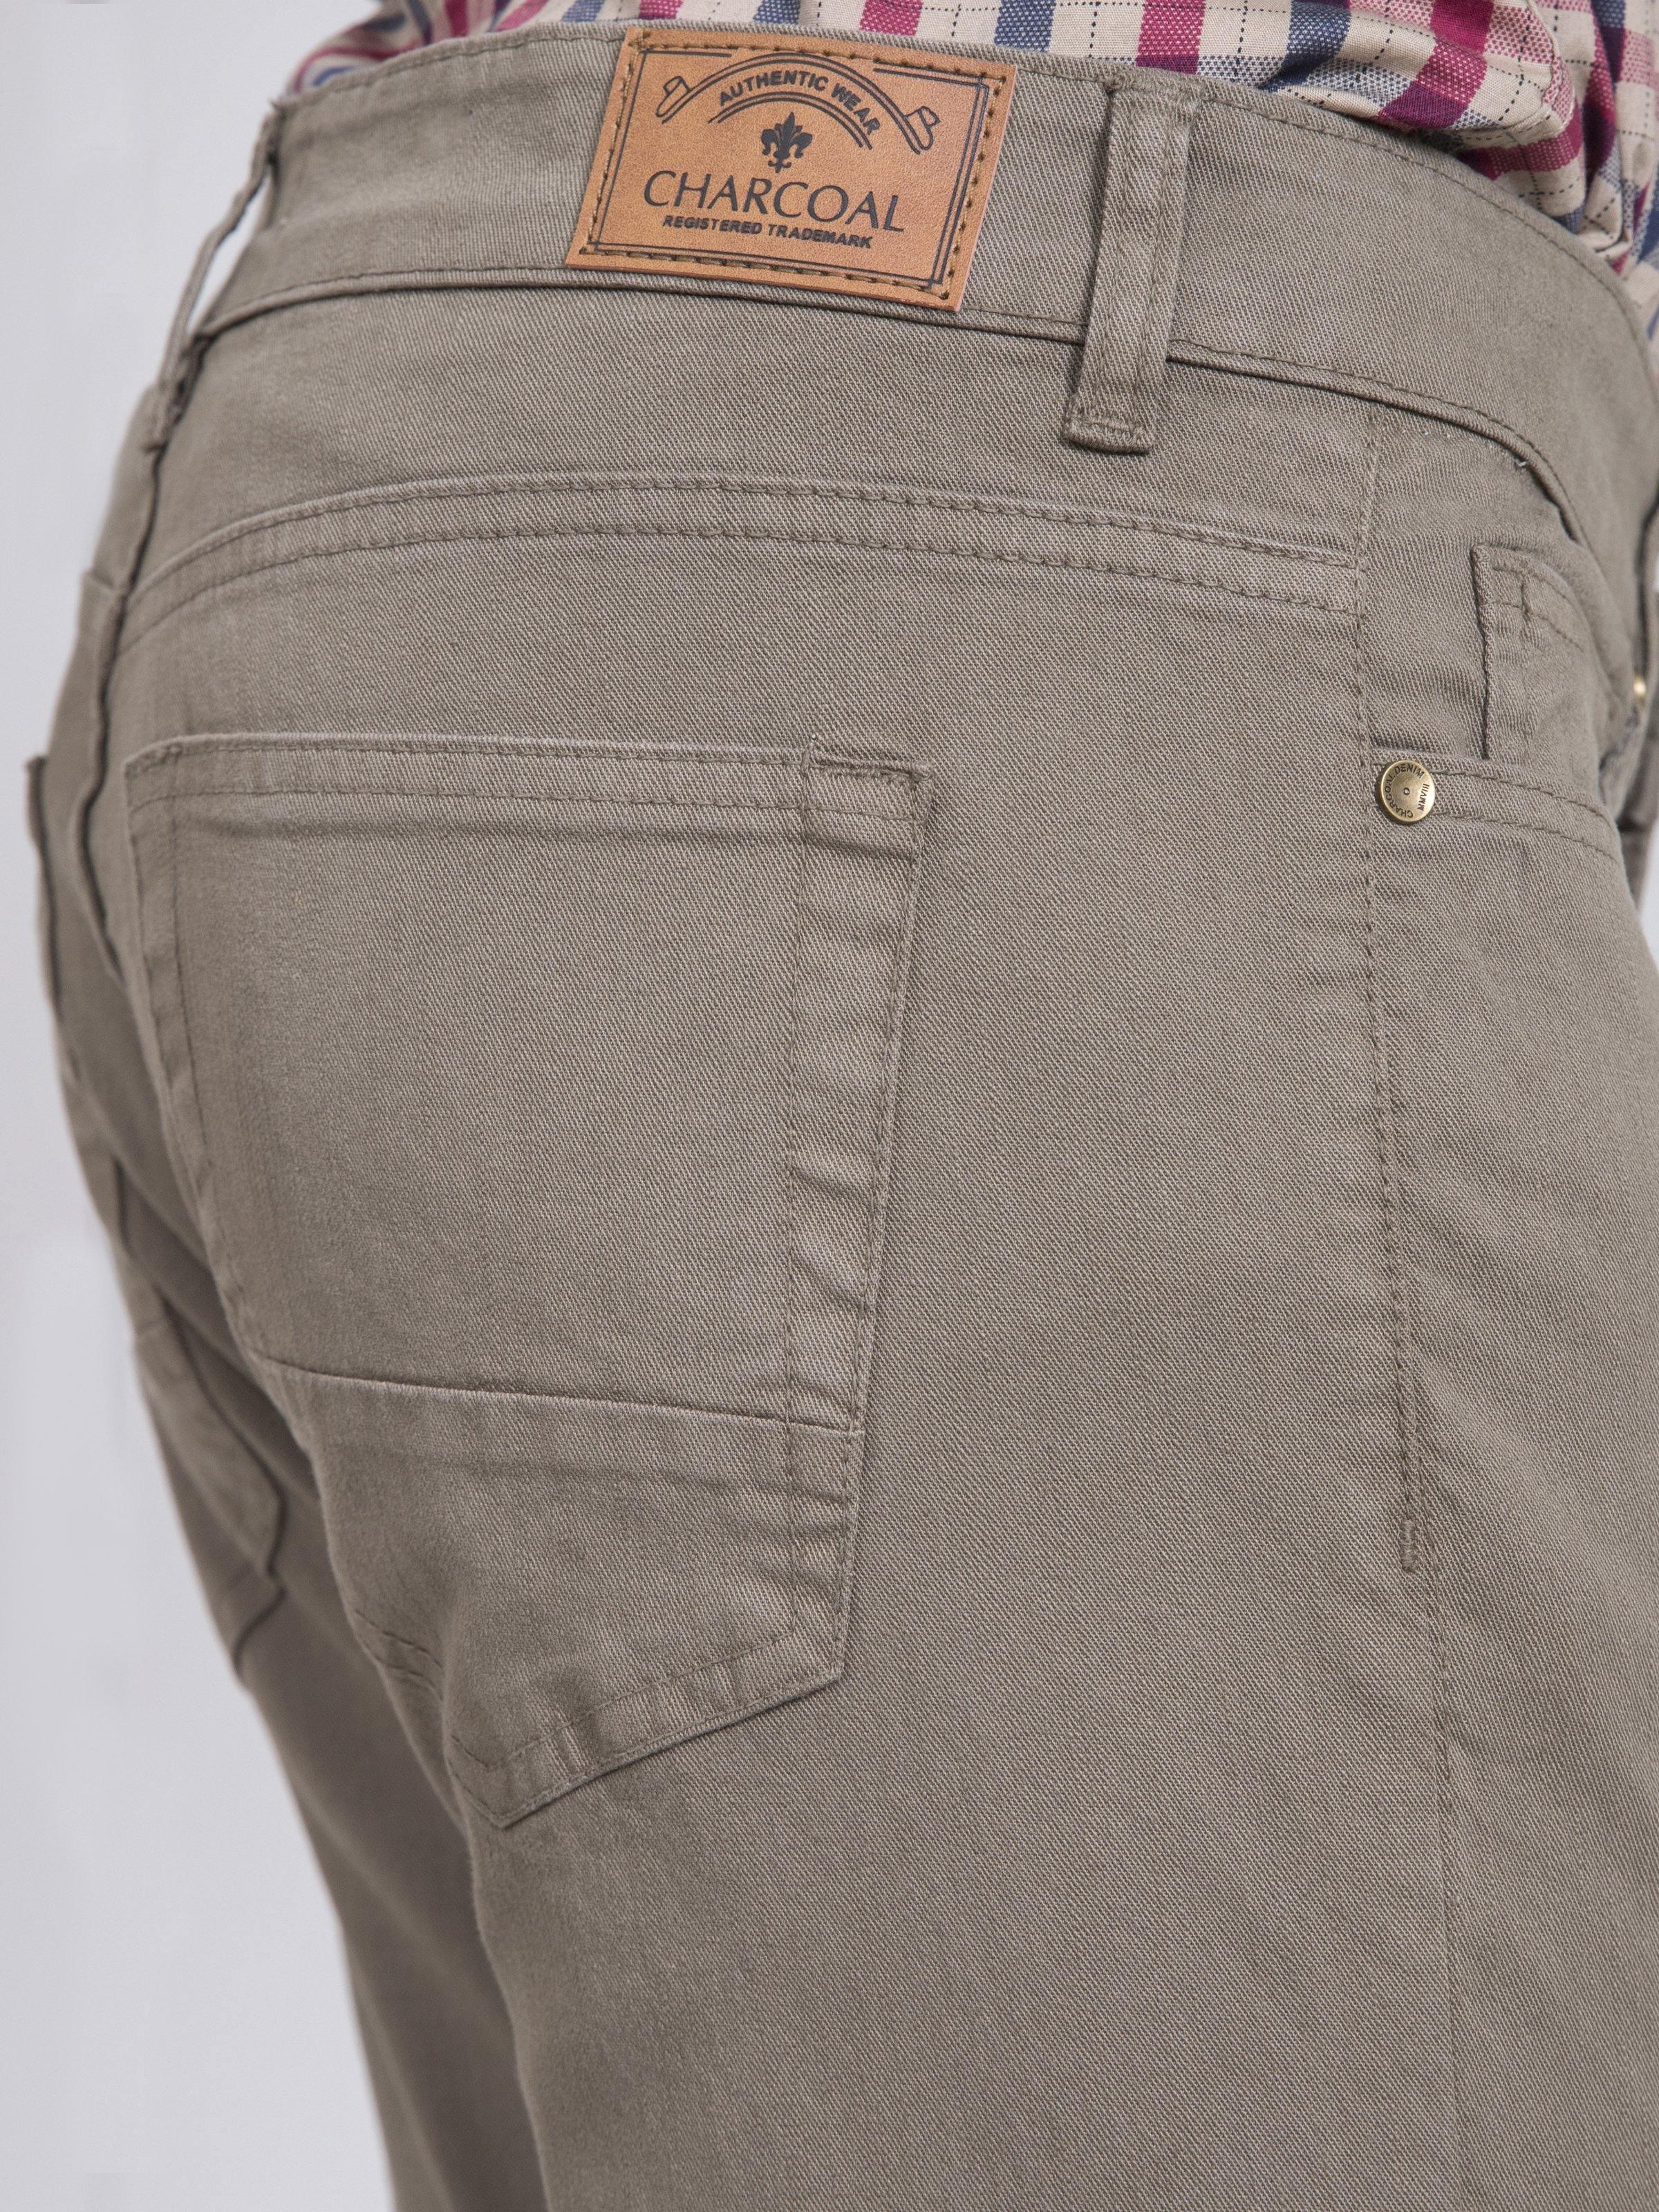 CASUAL PANT SLIM FIT 5 POCKET LIGHT OLIVE at Charcoal Clothing